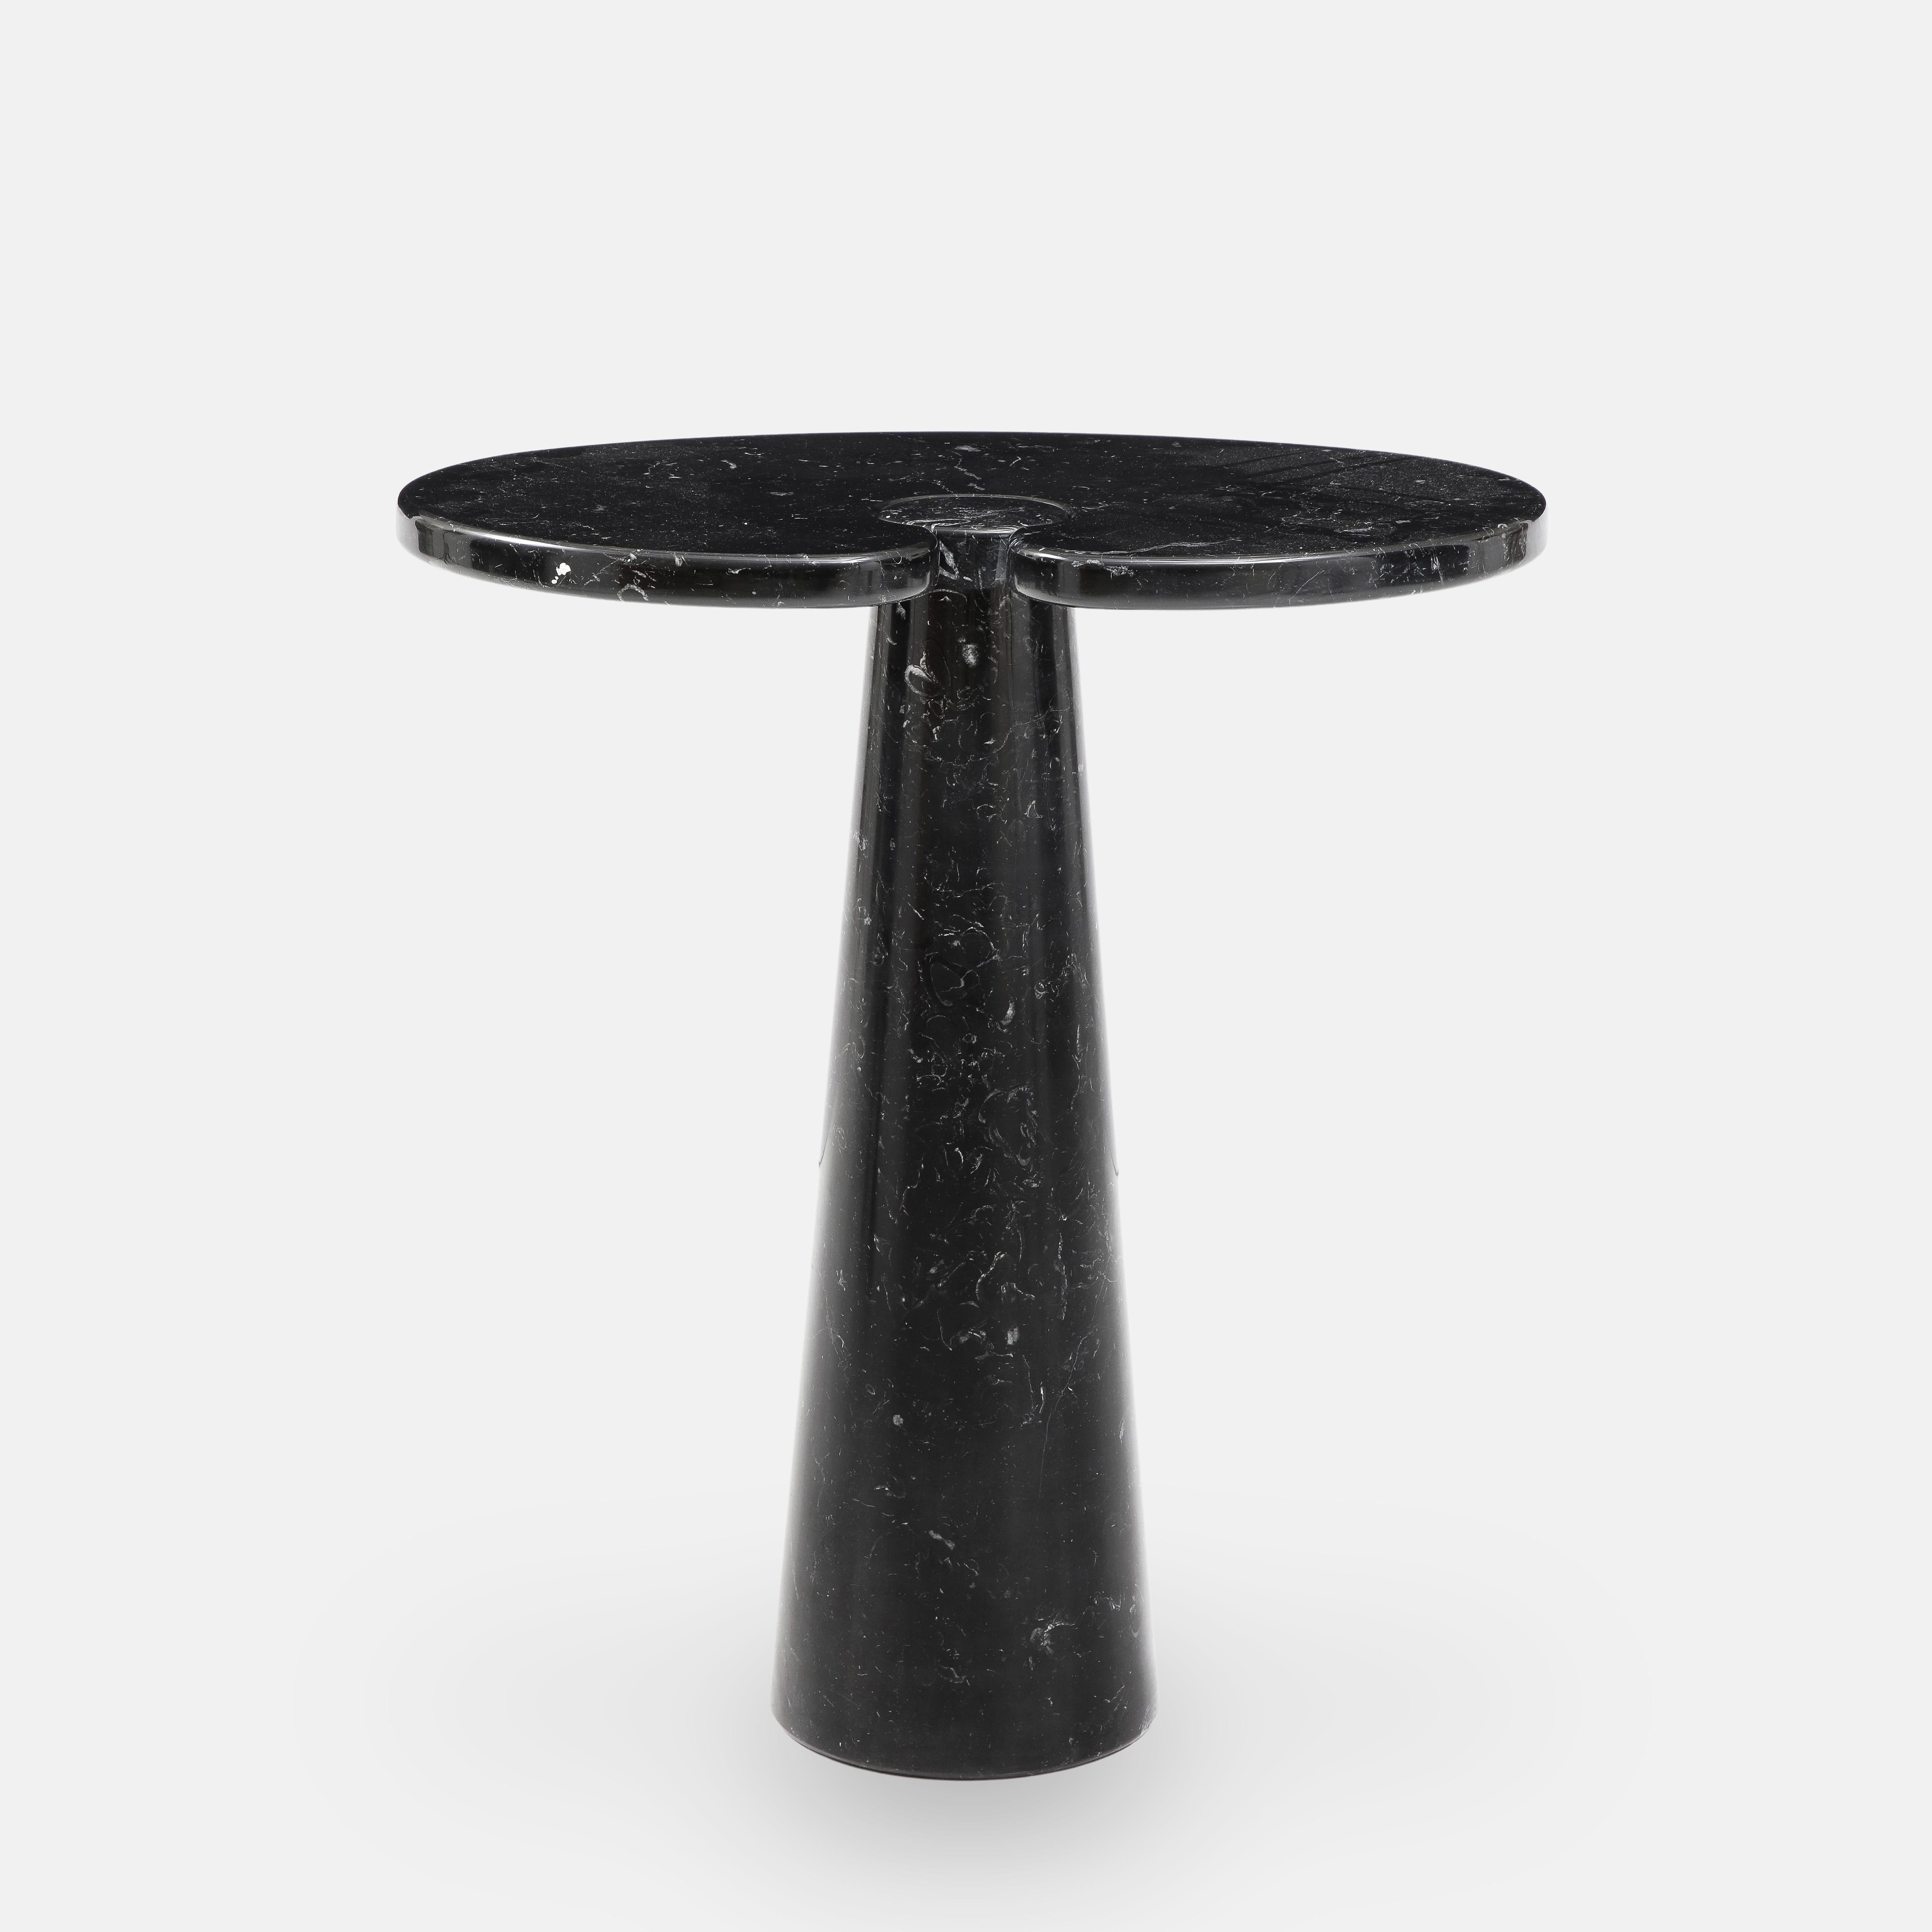 Designed by Angelo Mangiarotti for Skipper from the 'Eros' series, Nero Marquina marble tall side table or console with top fitted on a conical base. This elegantly organic table has beautiful subtle veining throughout. Original Skipper label on